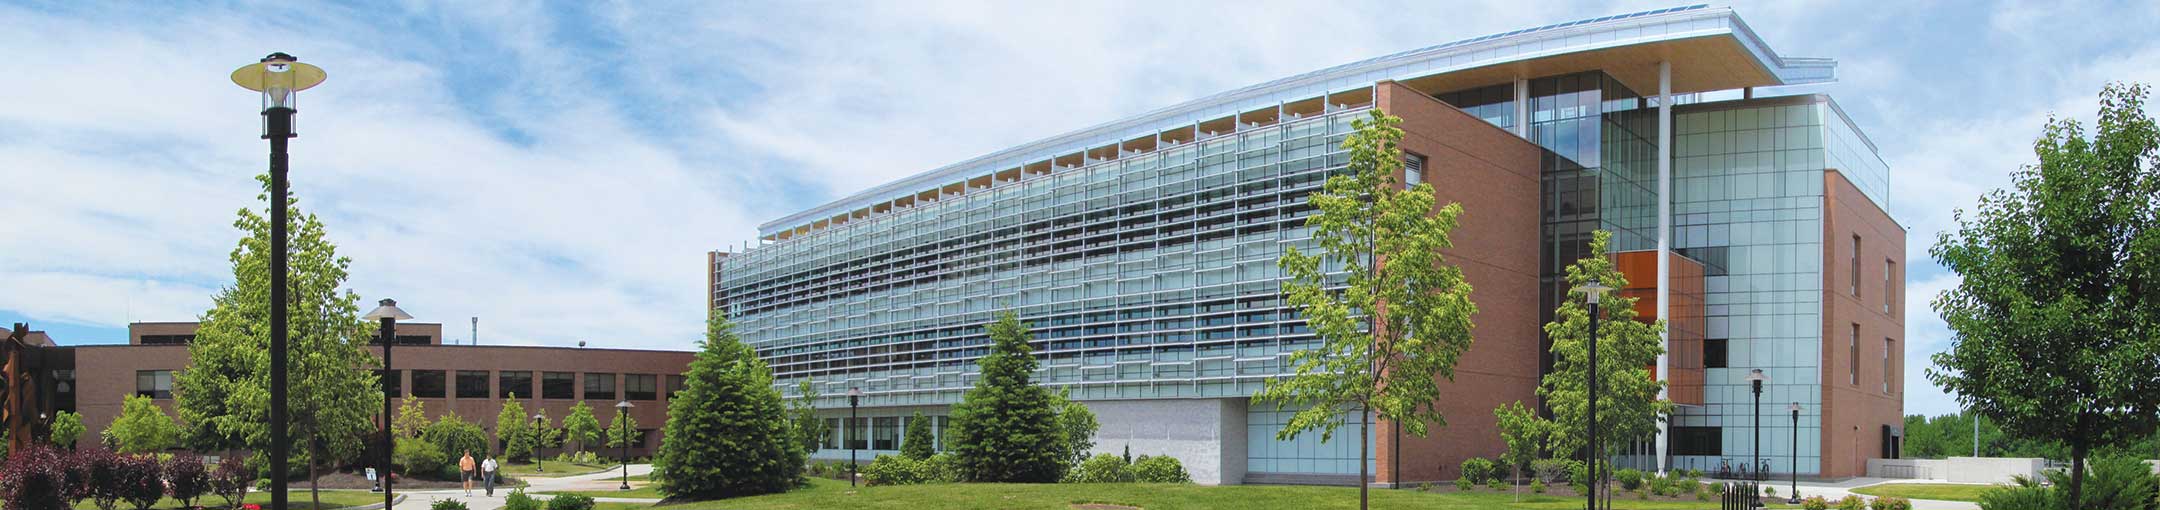 rit sustainability building